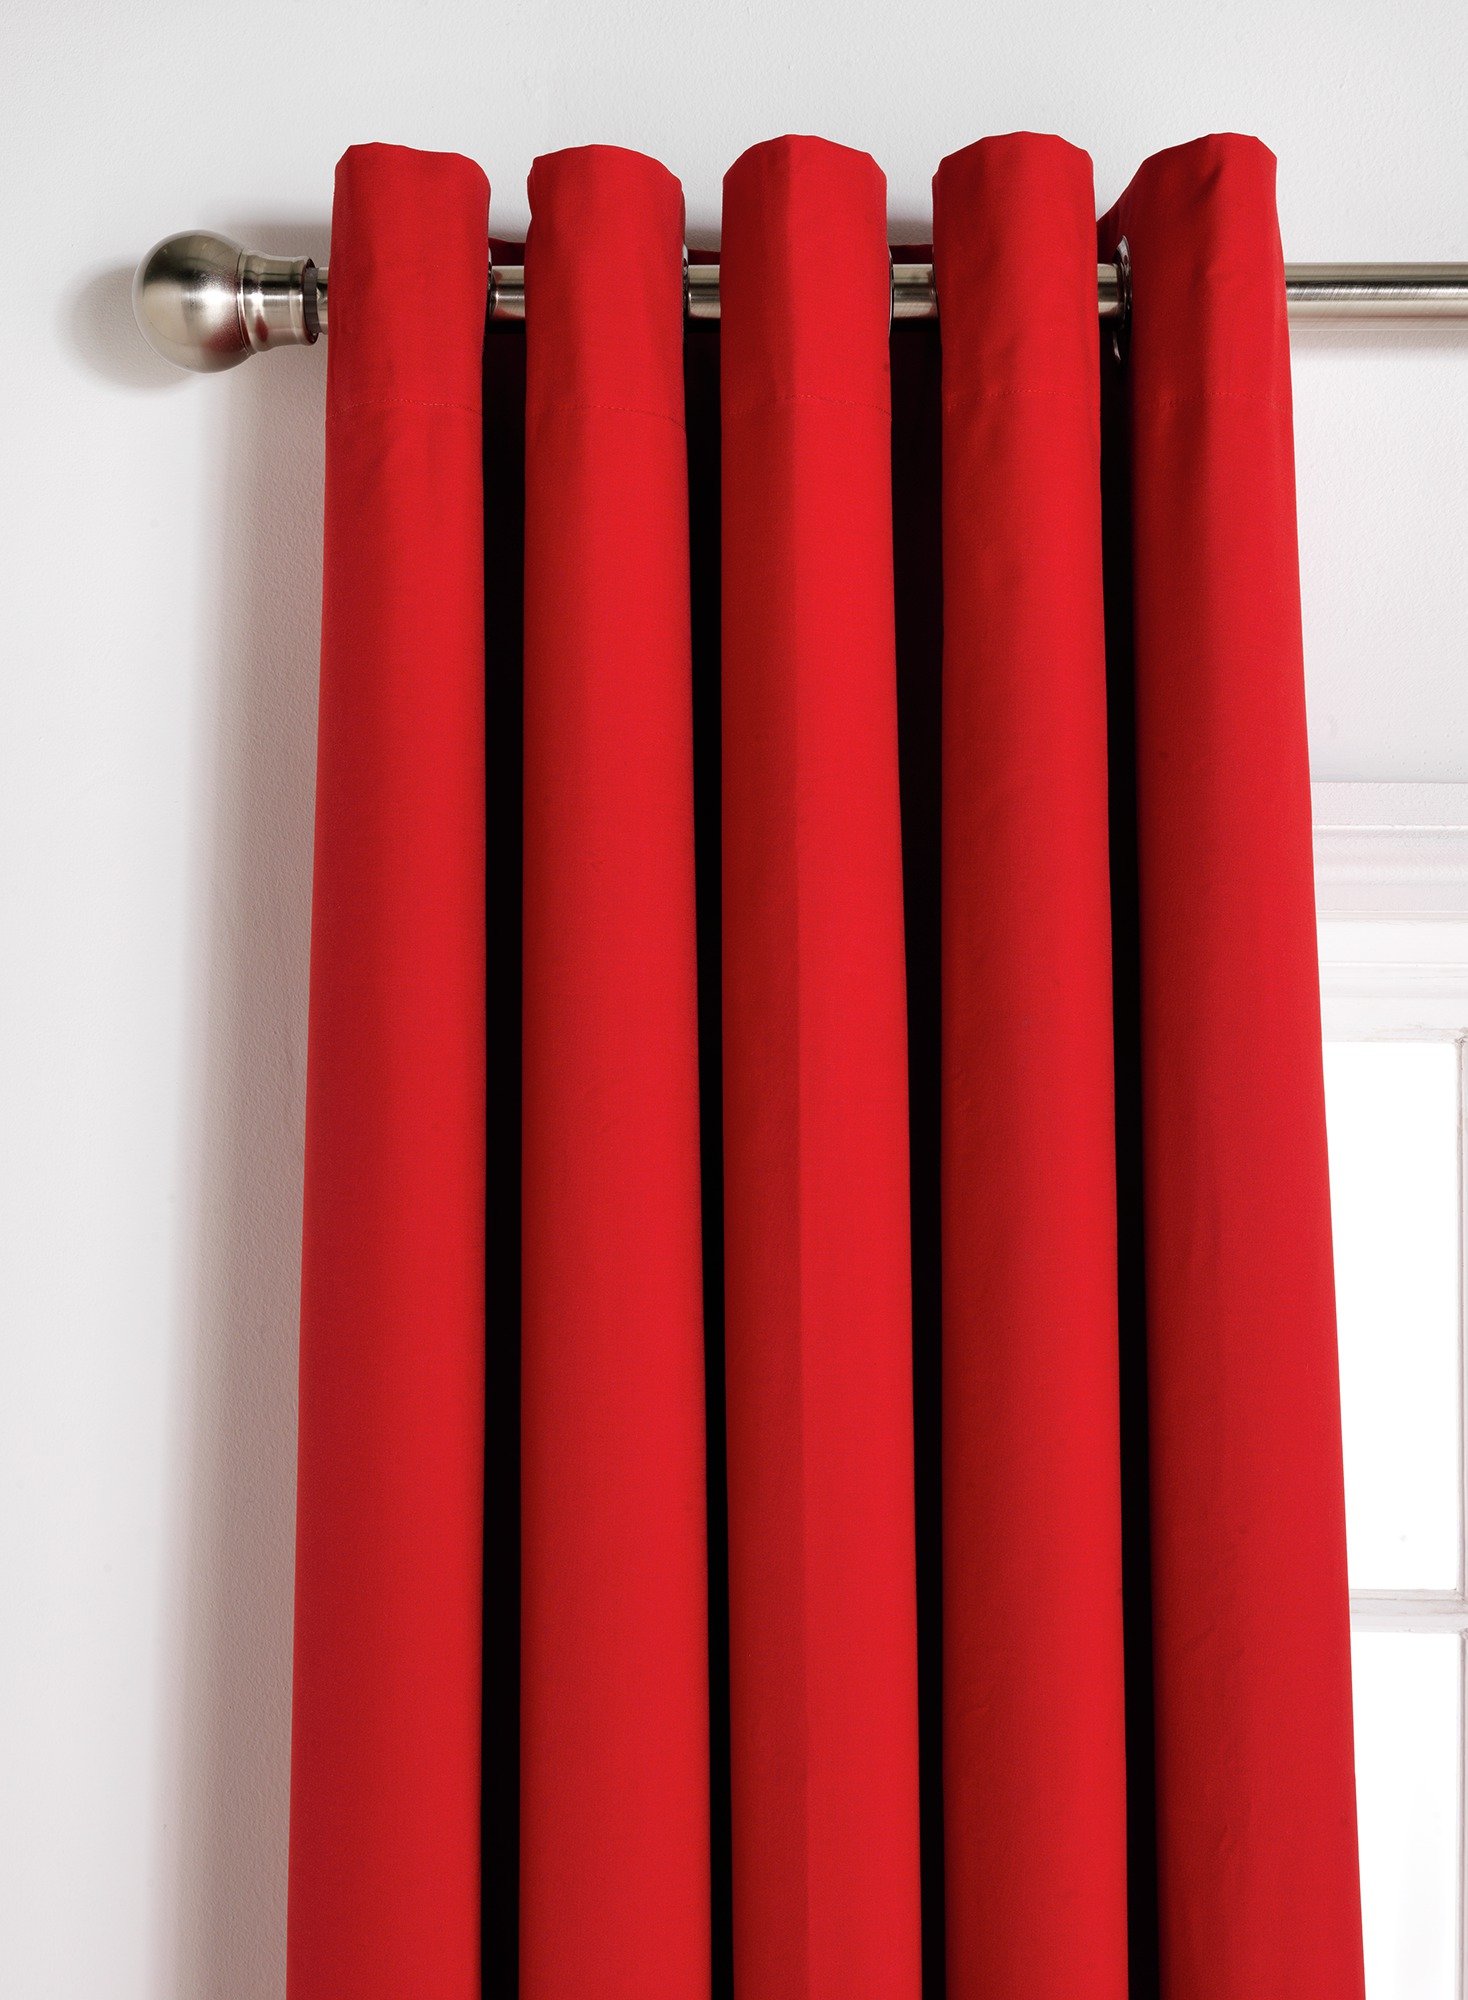 ColourMatch Blackout Thermal Curtain - 168x183cm - Poppy Red